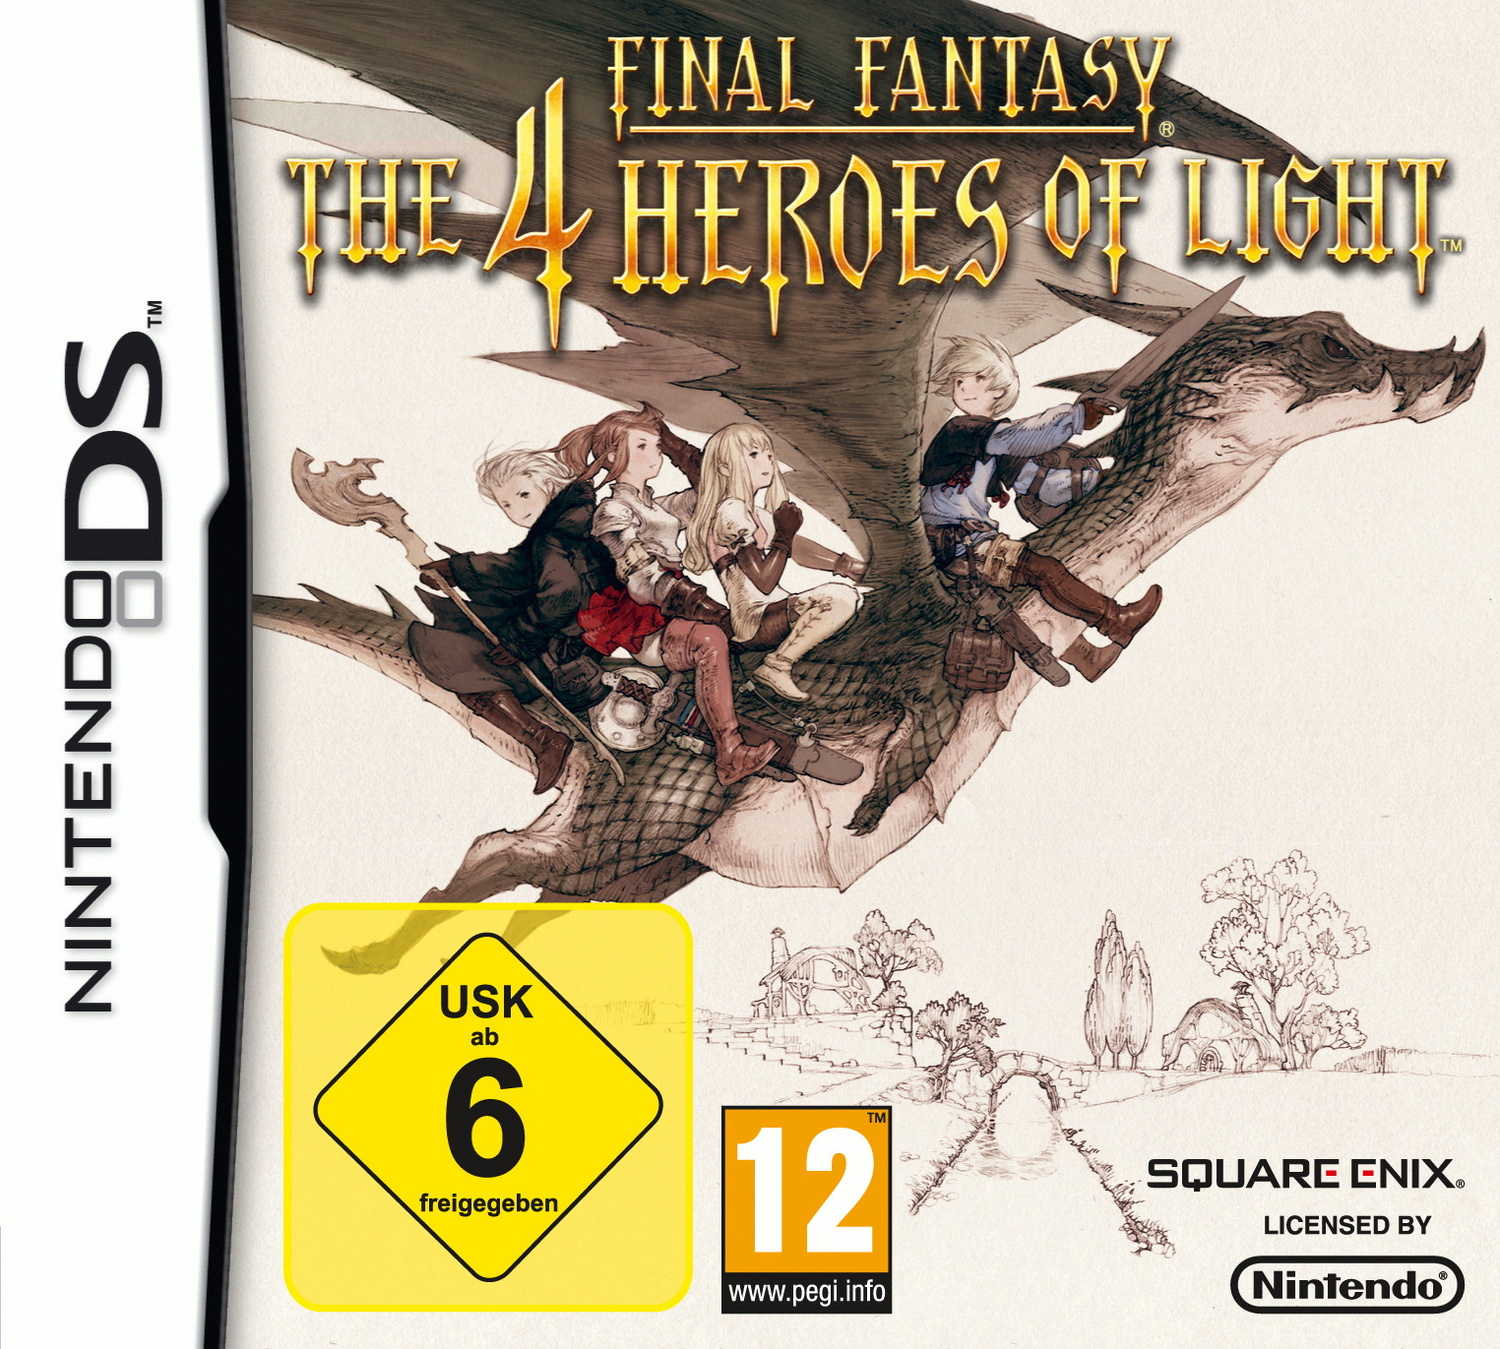 DS] The Of Heroes Fantasy: - Final Light 4 [Nintendo